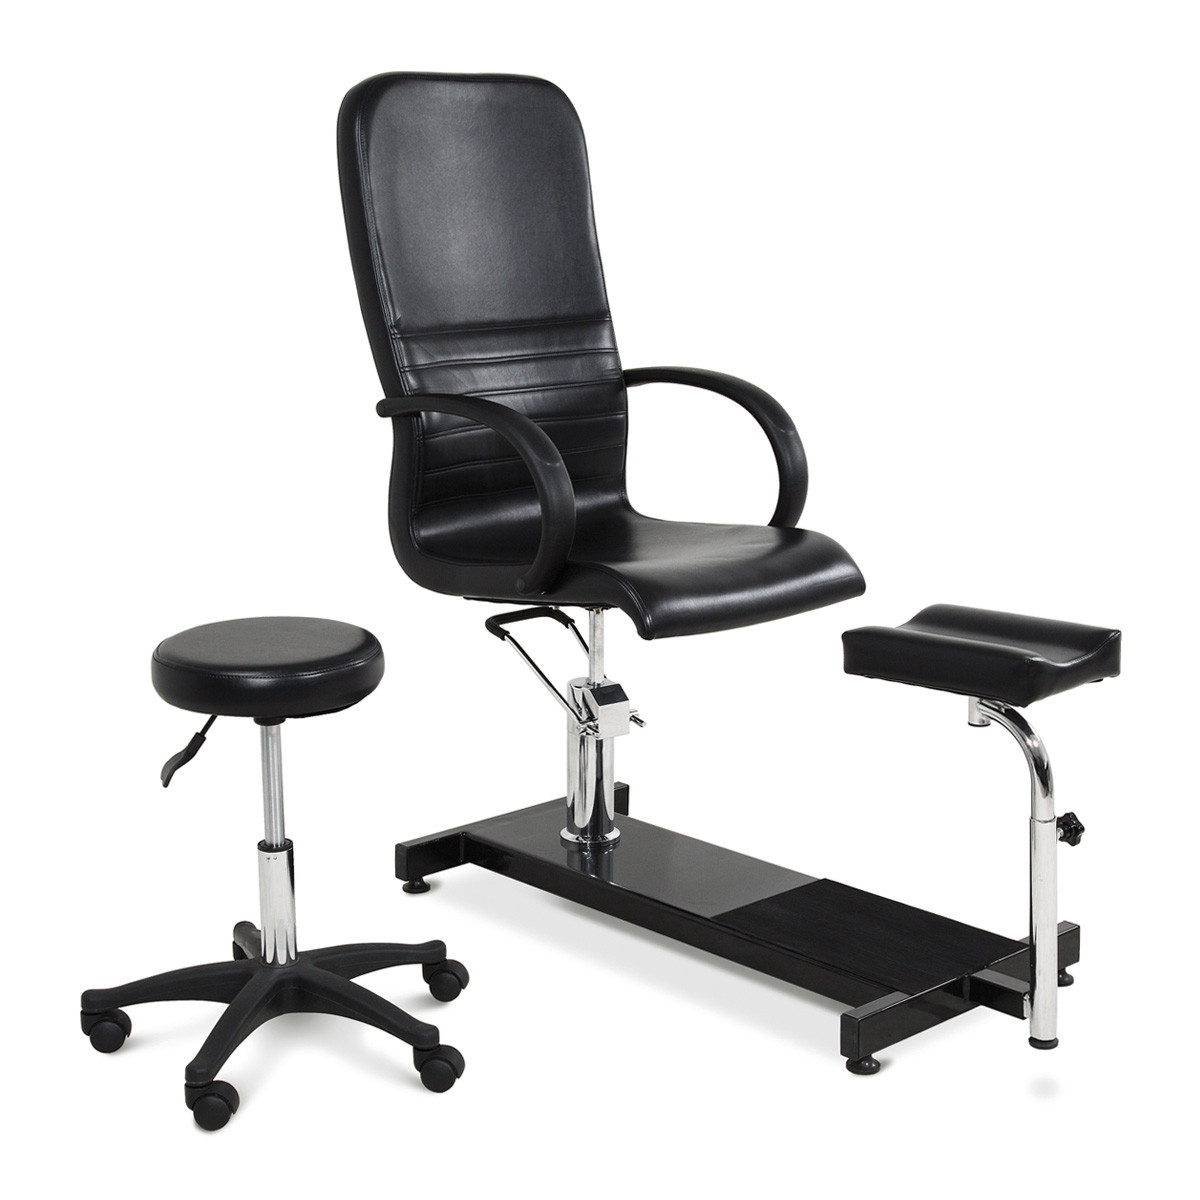 Black mechanical chair with footrest and Podo Station stool